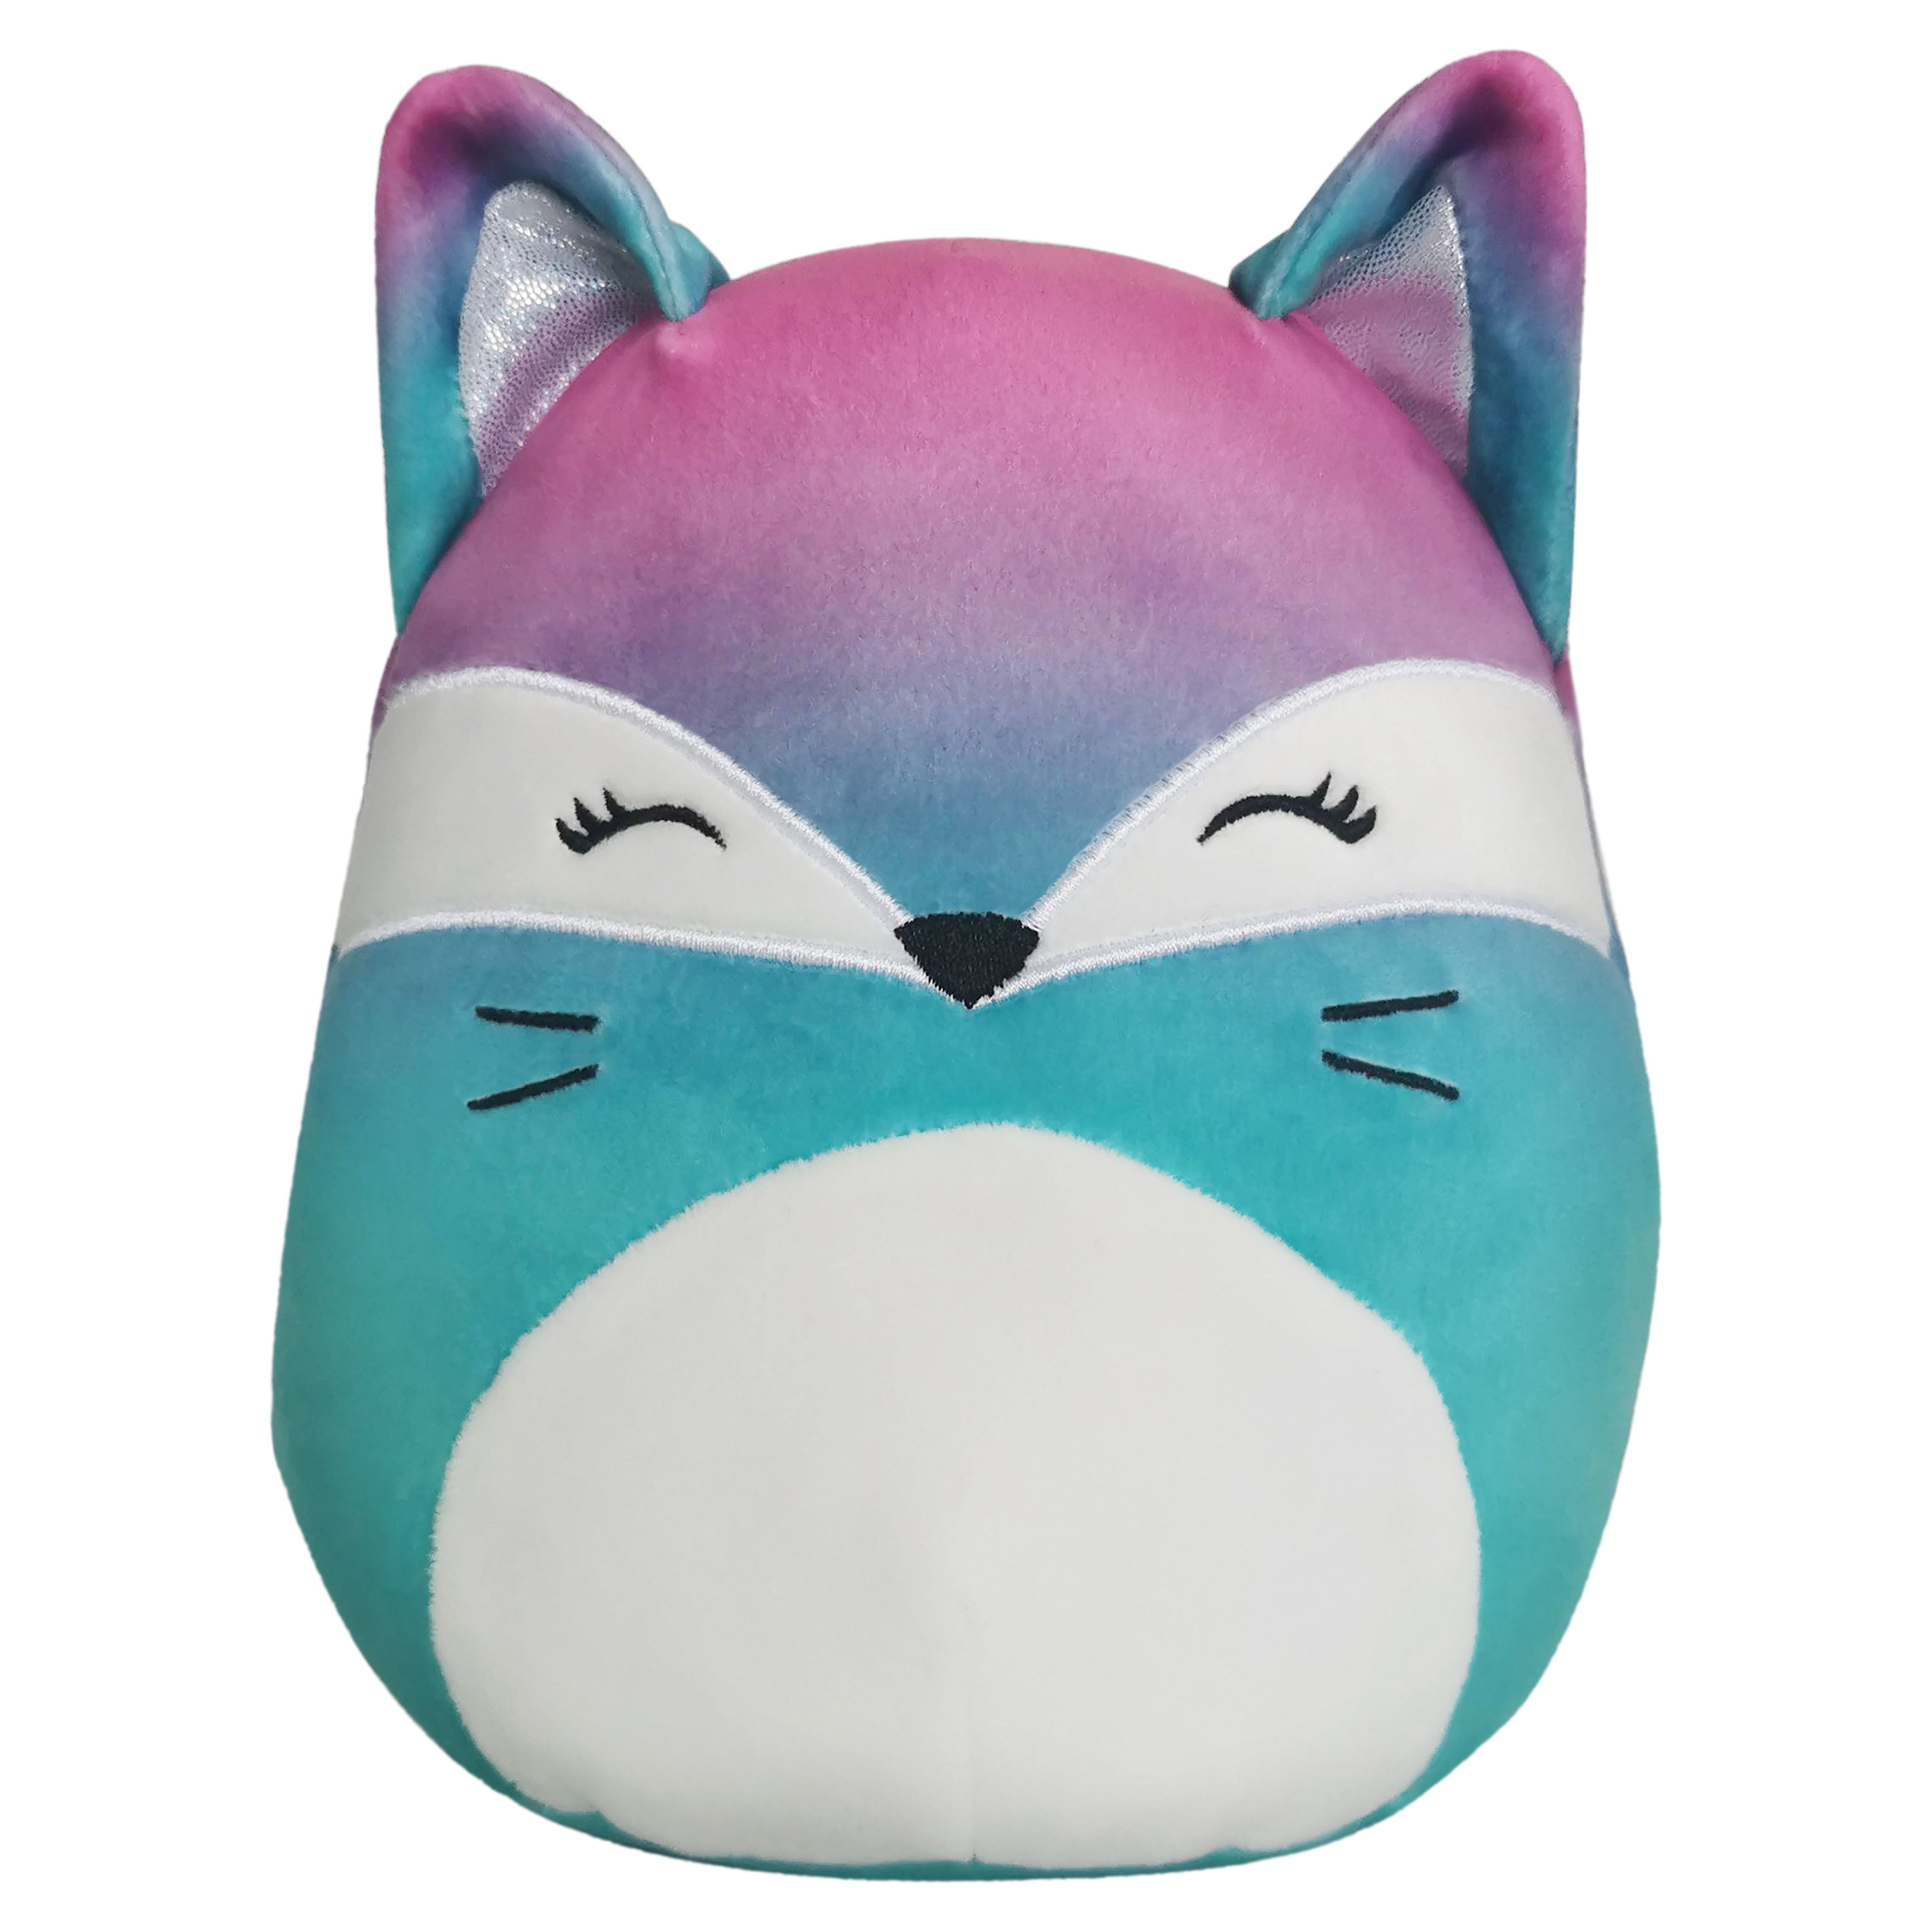 Squishmallows Official Kellytoy Plush 7.5 inch Pink Nigeria